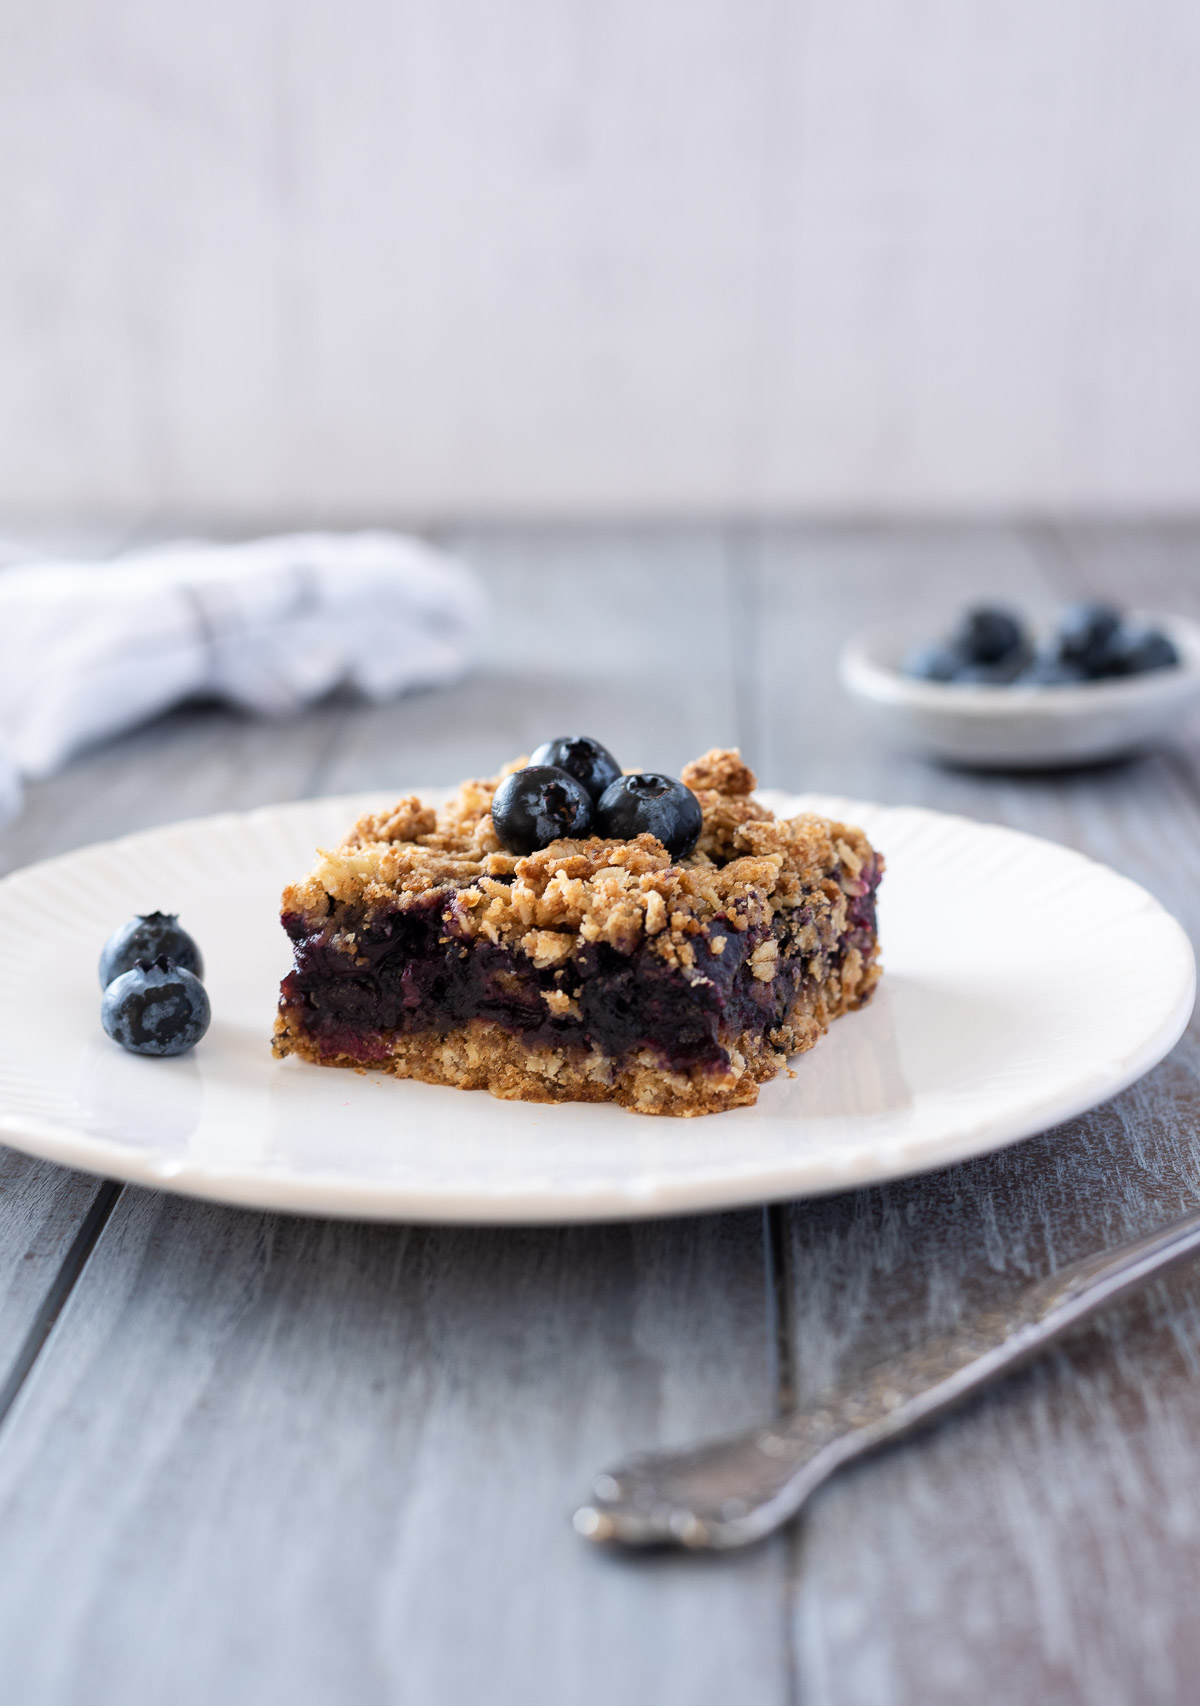 Blueberry crumble bar on a white plate with blueberries